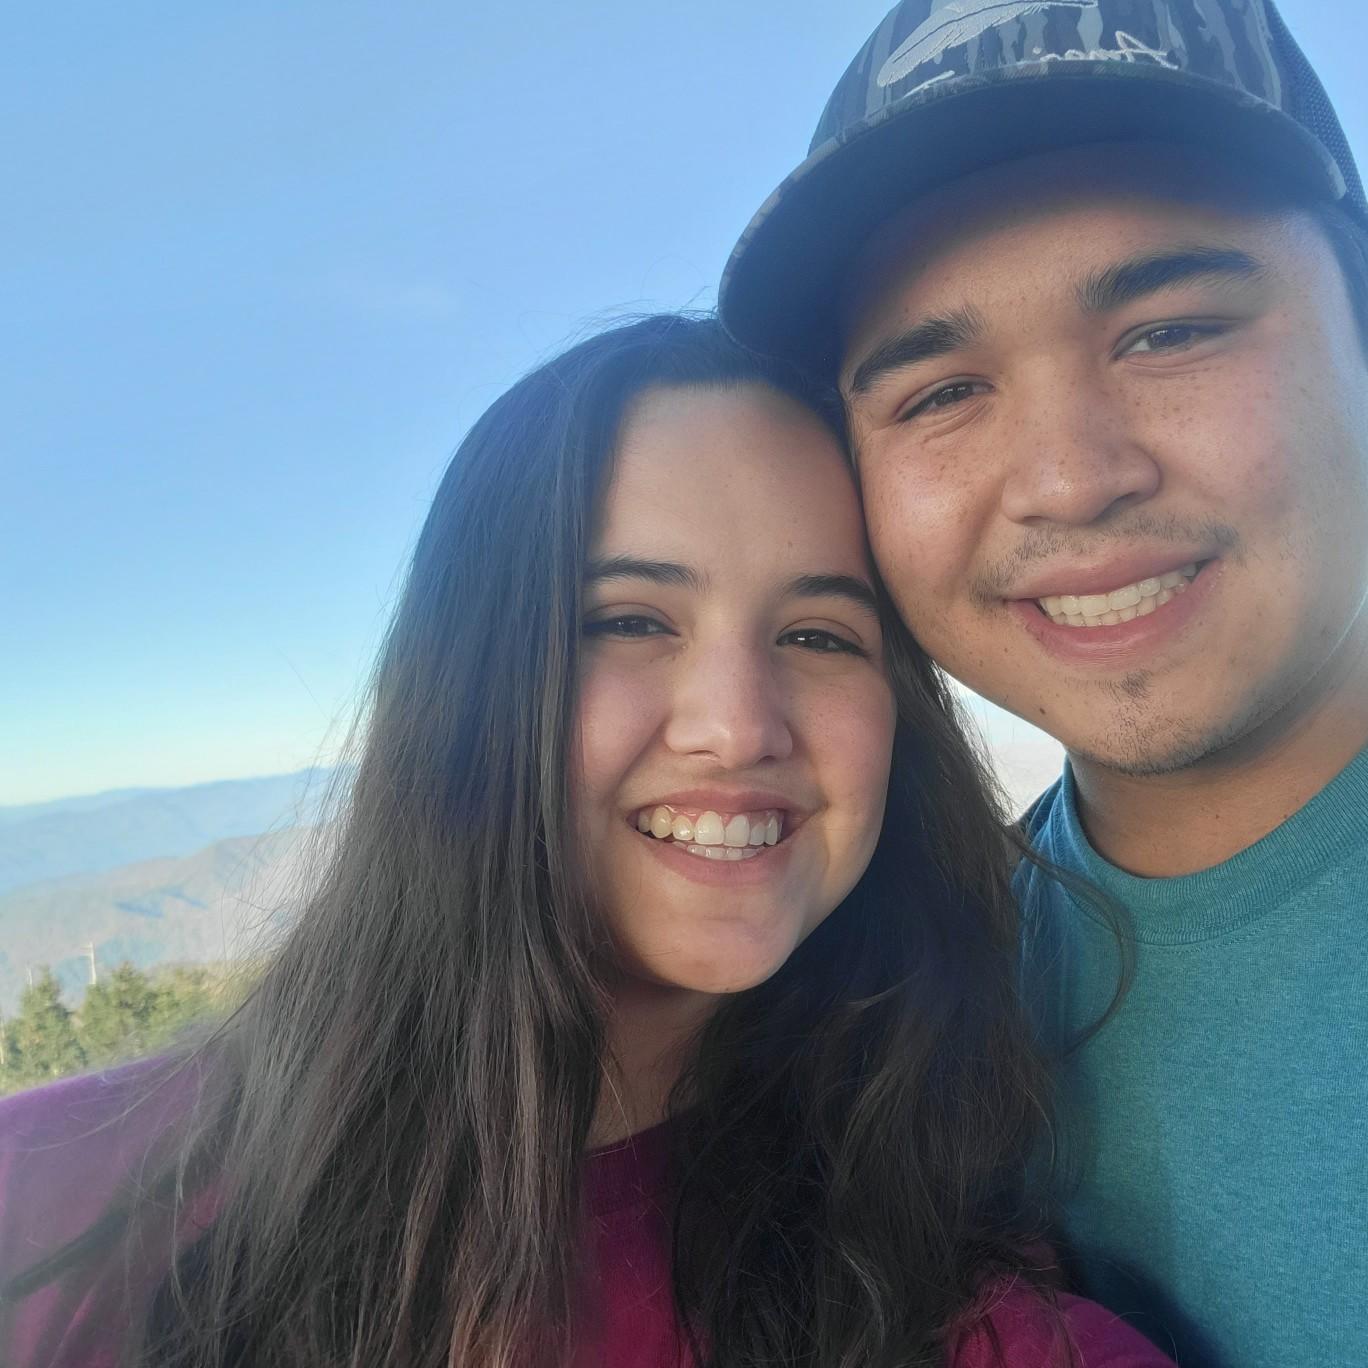 We took this selfie at Clingman's Dome the day we got engaged